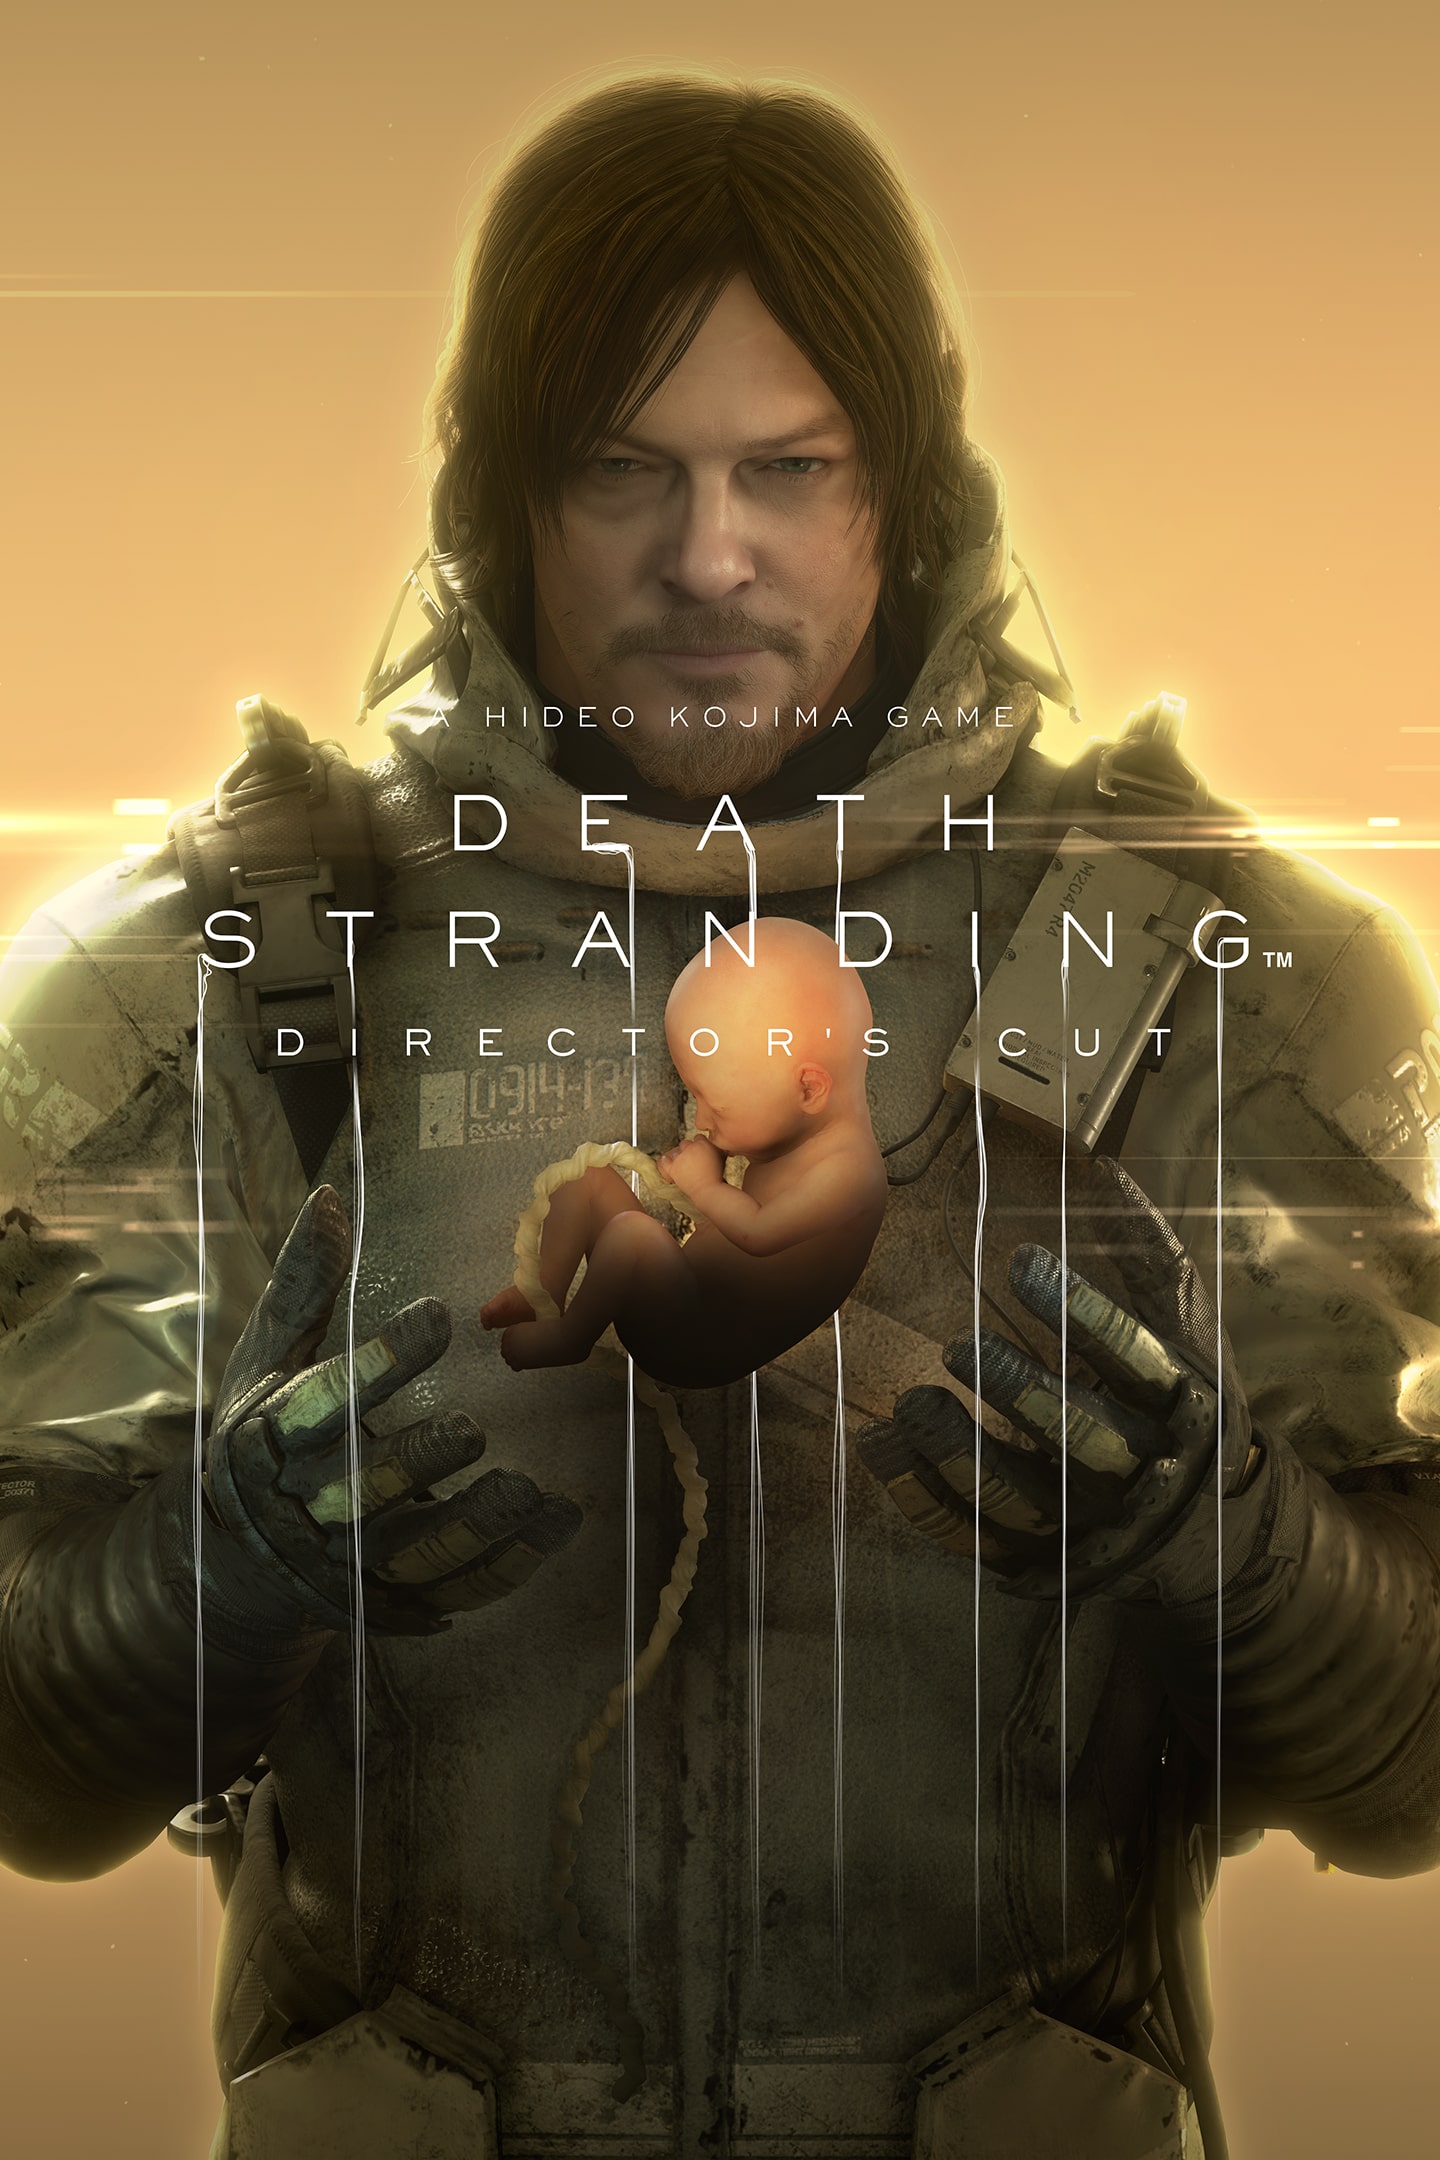 How to transfer a Death Stranding PS4 save to PS5